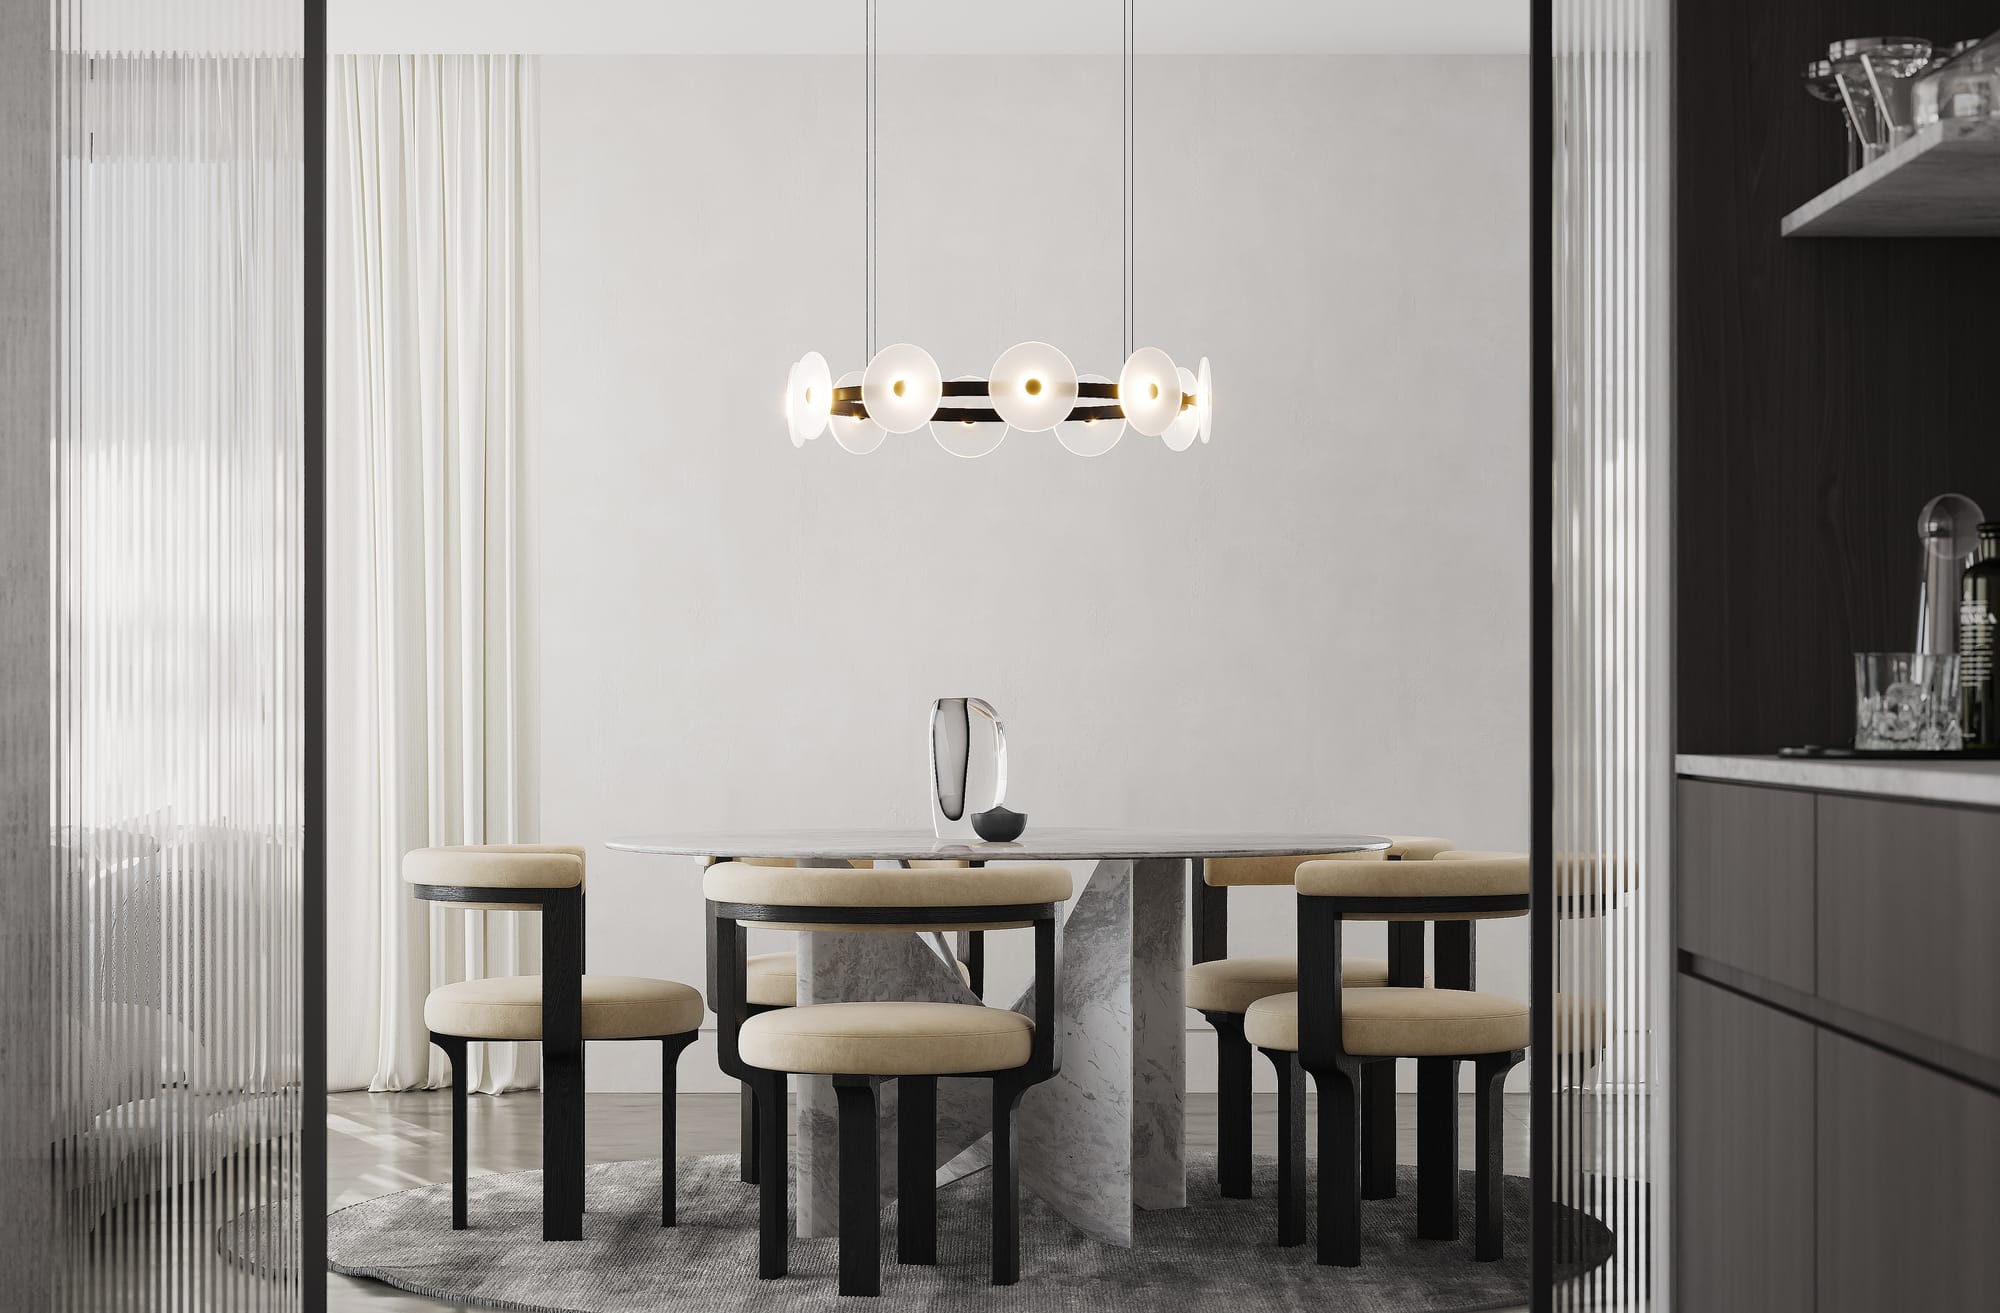 Coral Ring Pendant Light by SOKTAS. Copyright of SOKTAS. Circular pendant light hanging above round marble dining table with beige and black chairs. 